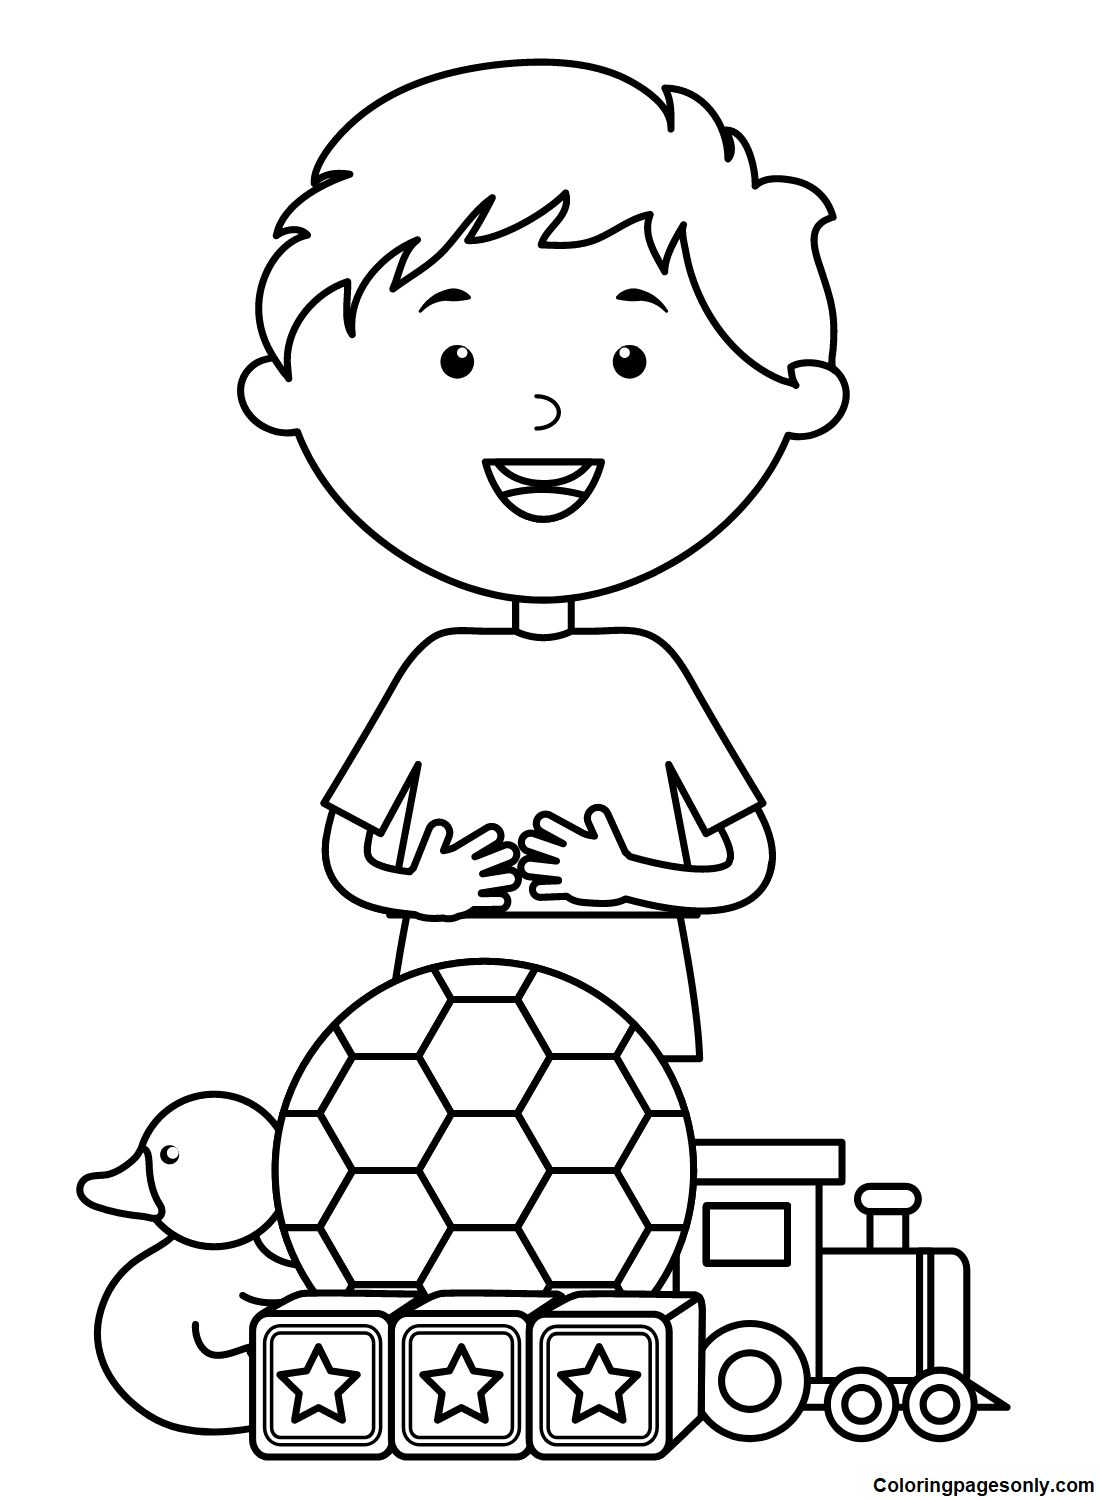 Cute Little Boy with Soccer Ball and Toys Coloring Page